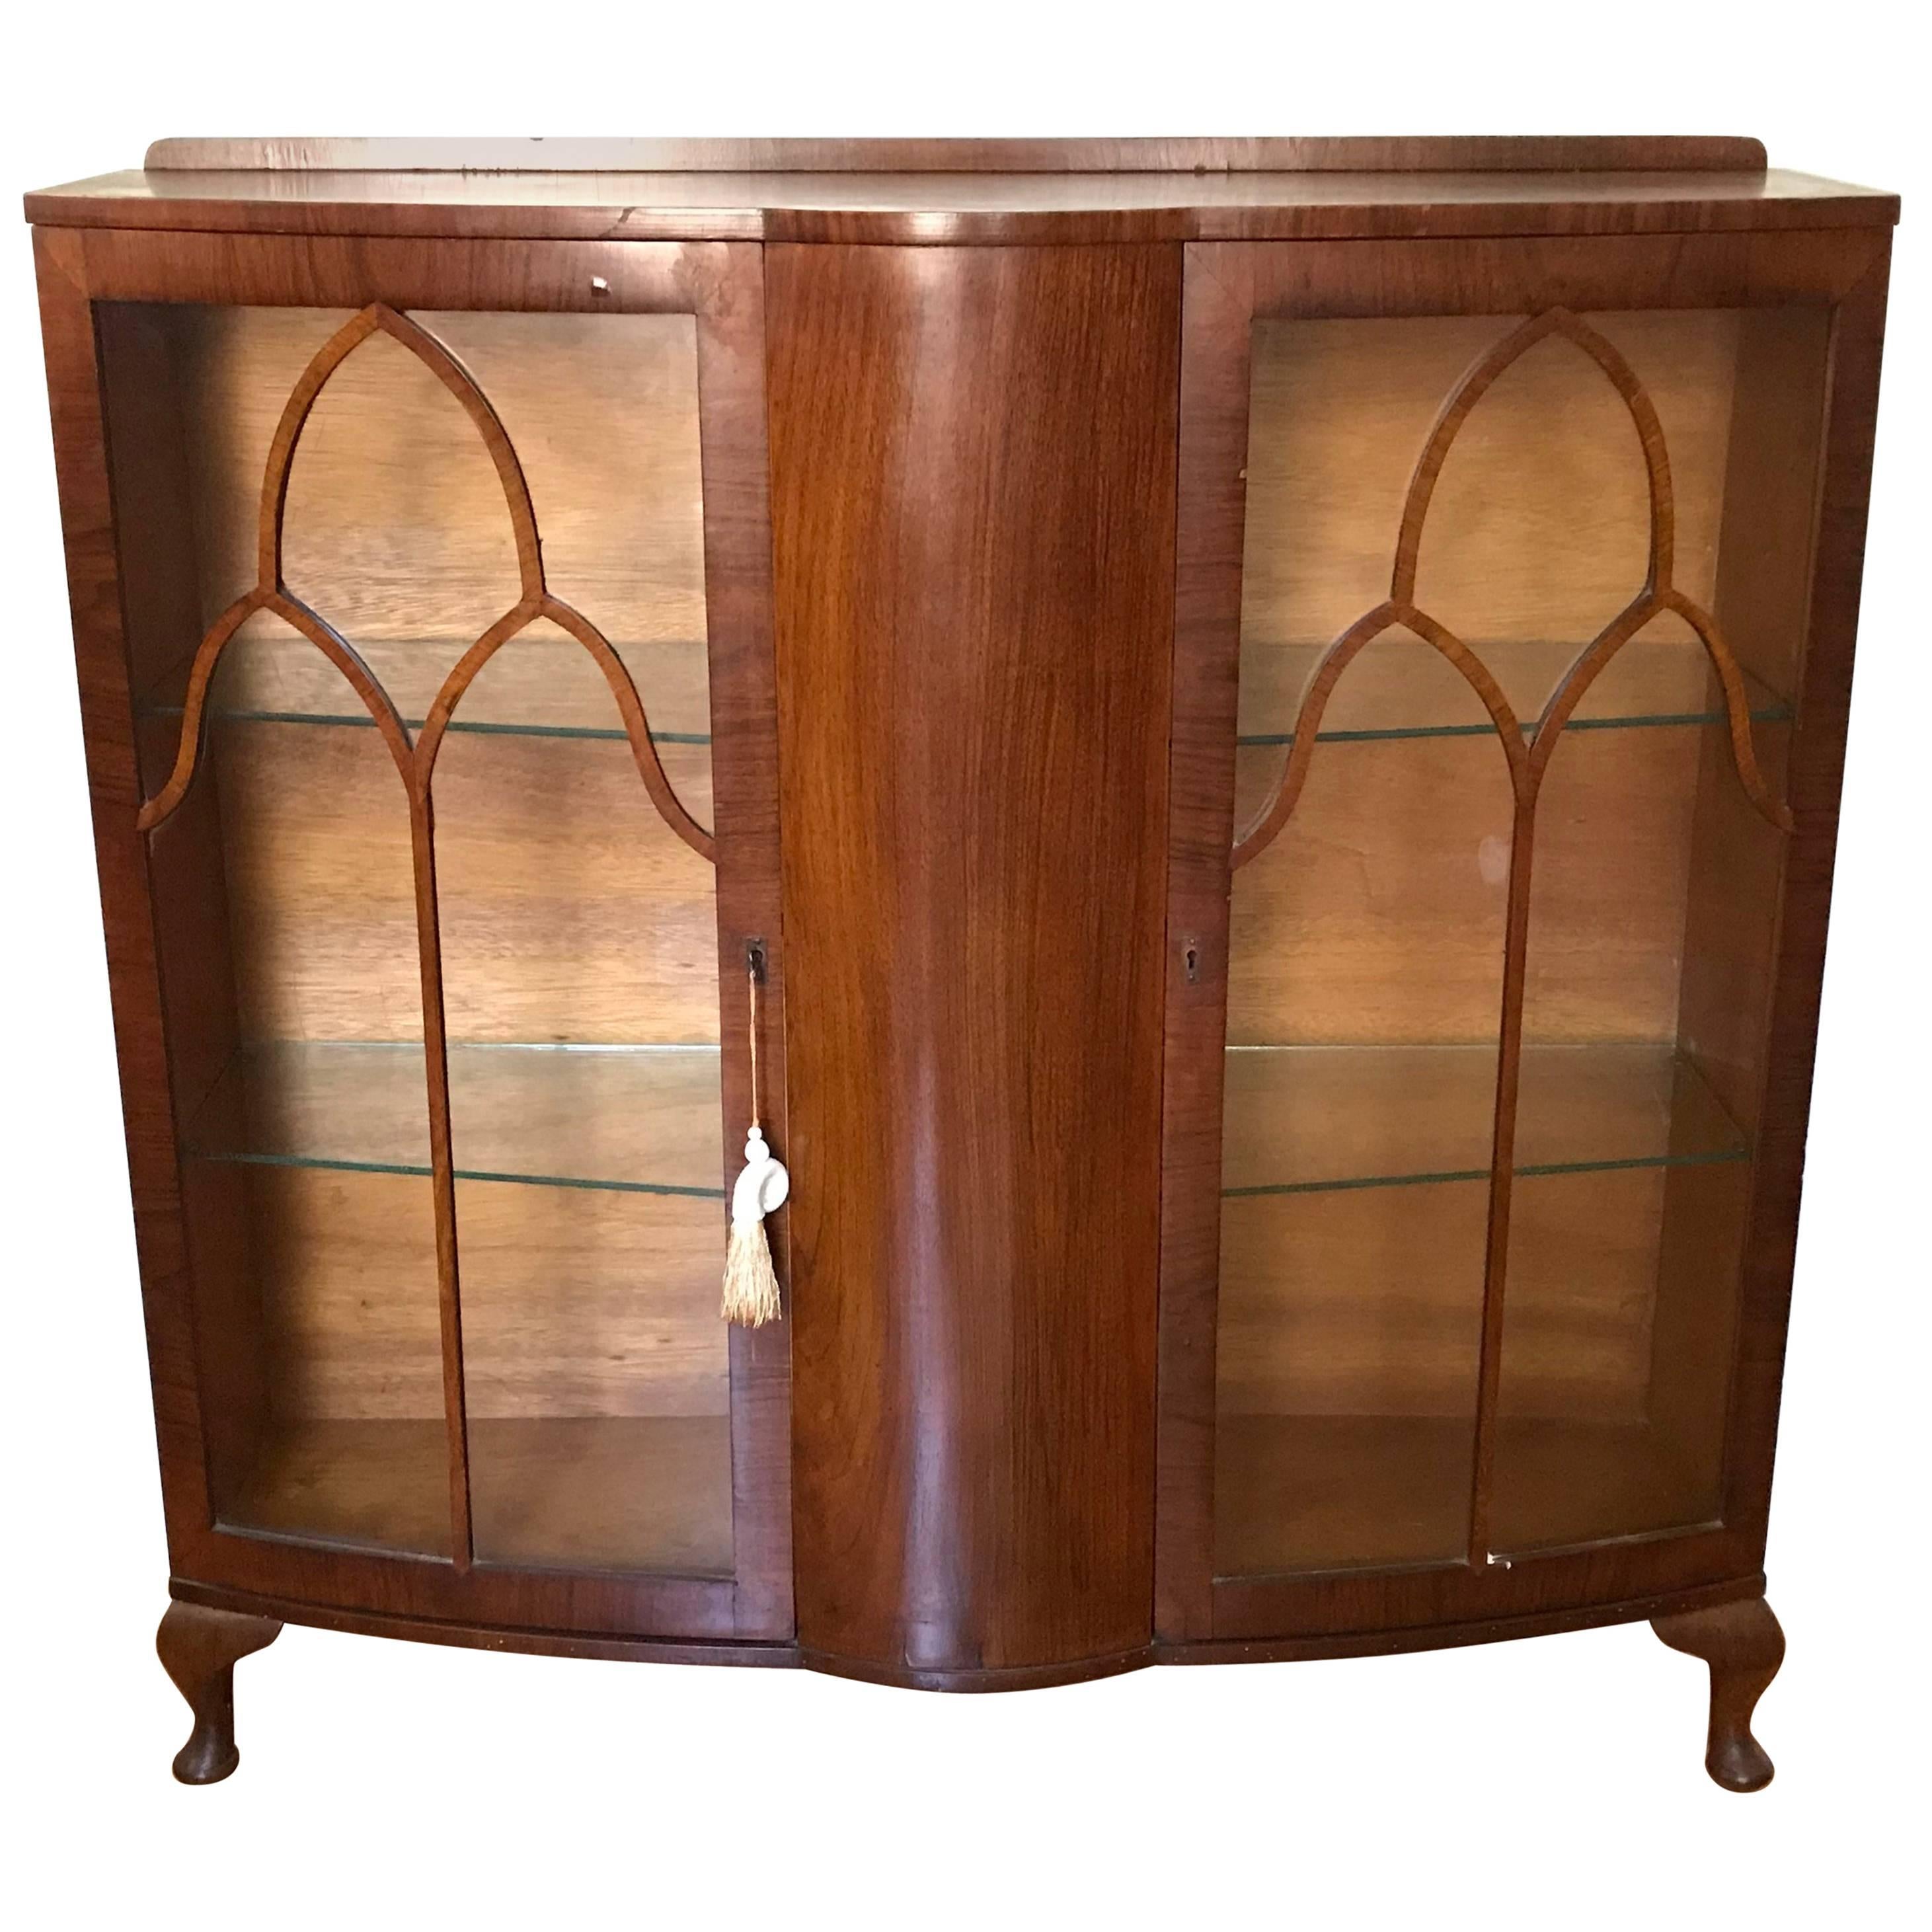 1920s French Art Deco Walnut and Glass Curio Display Cabinet